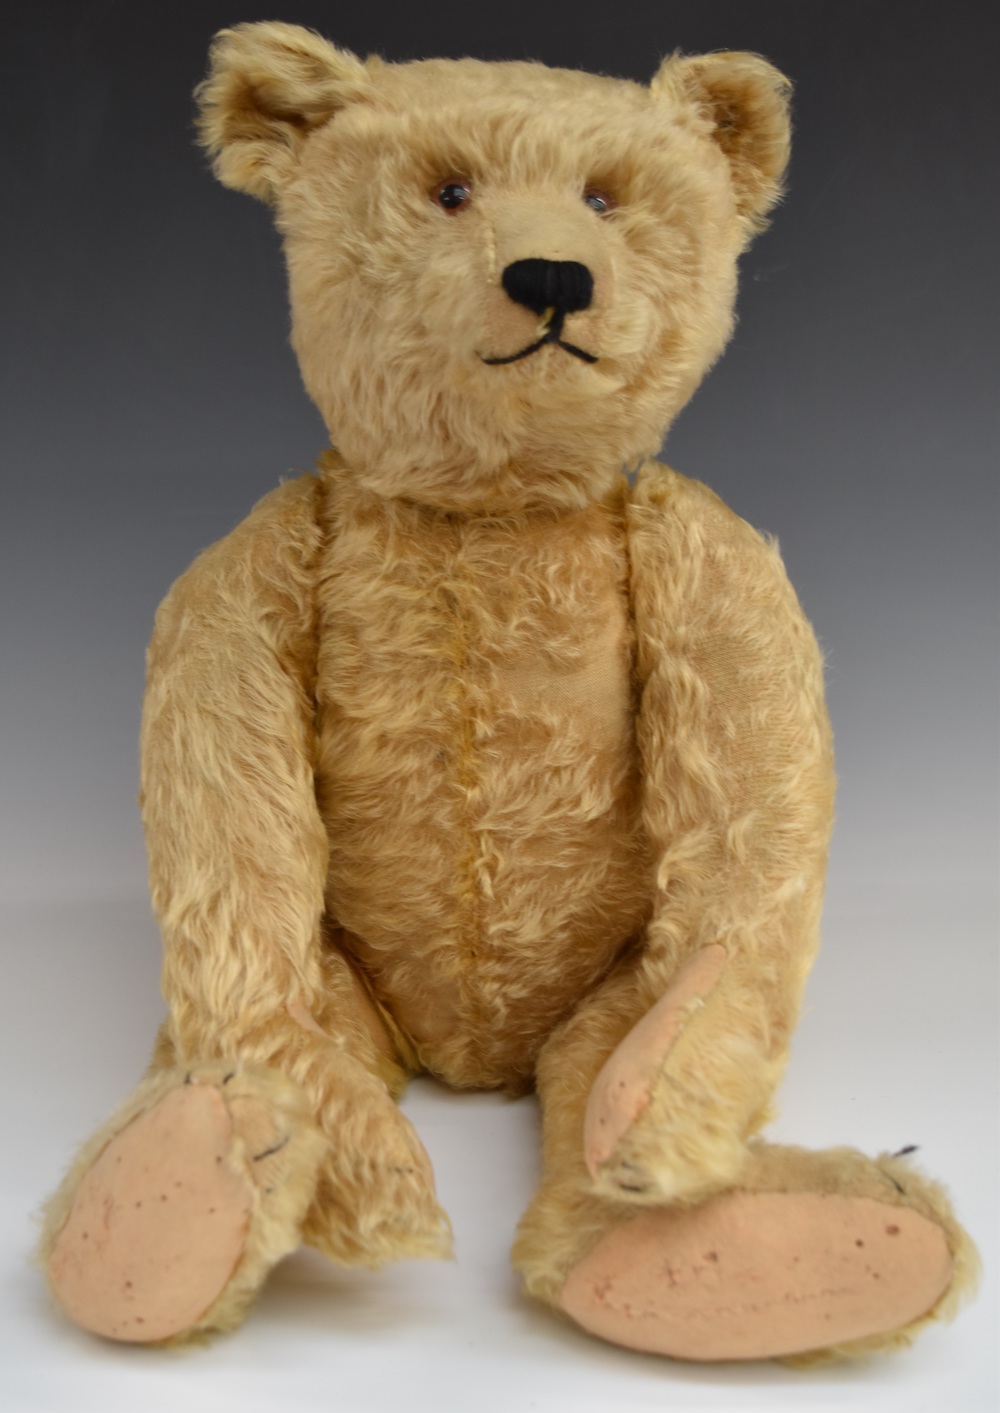 Steiff Teddy Bear With Blonde Mohair, Straw Filling, Disc Joints, Stitched Features And Button To Ear, 60Cm Tall. £2,200